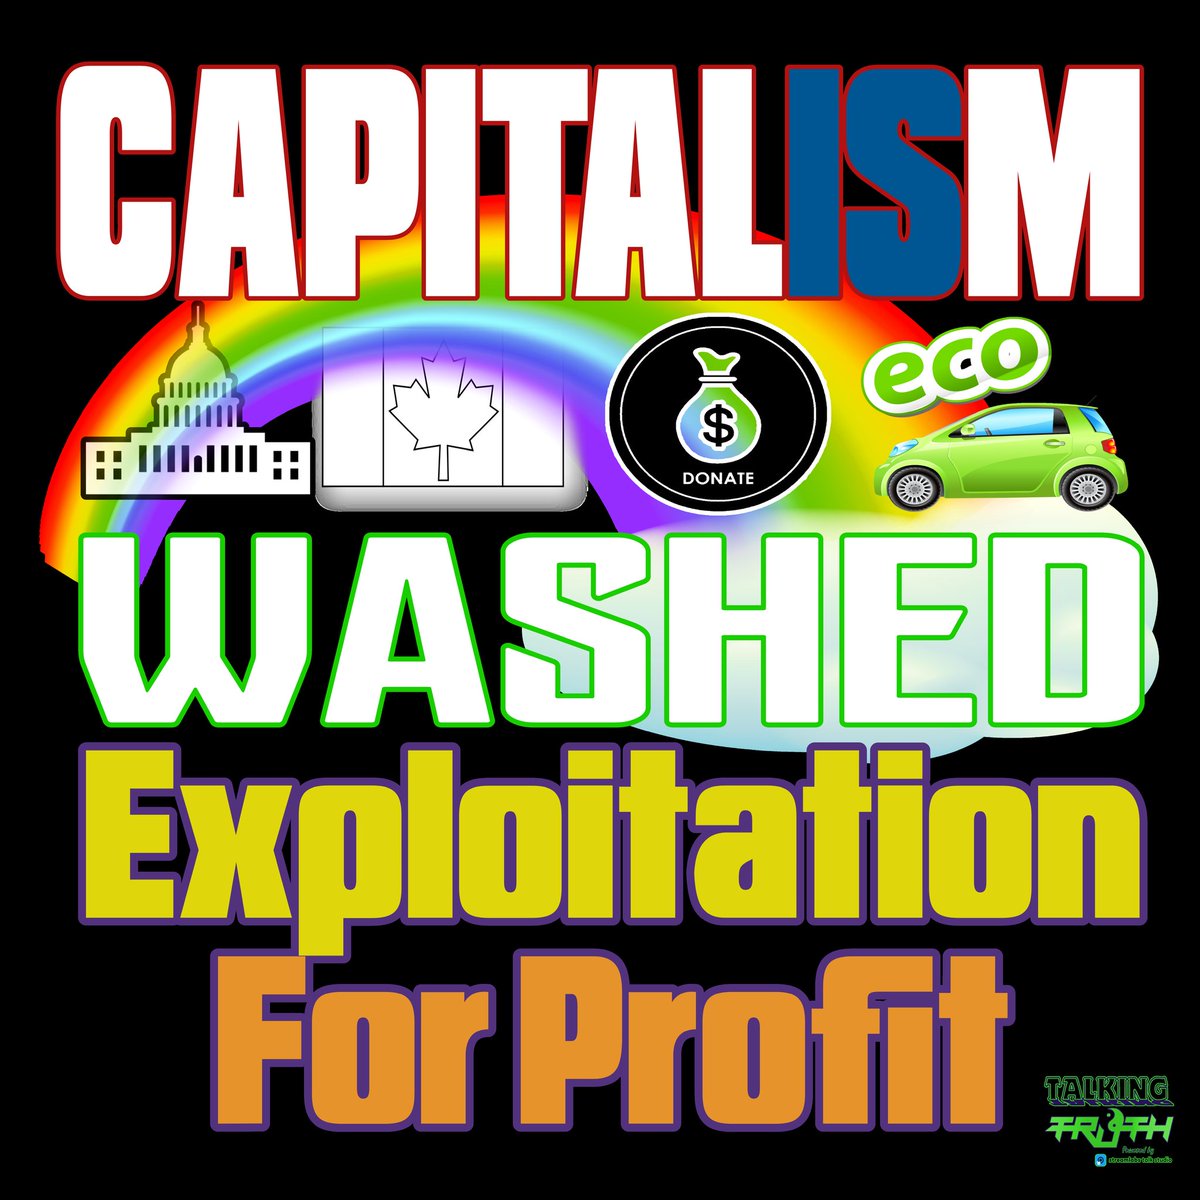 Allow us to correct #GenocideJoe #GenocideJoeBiden 

Competition means nothing 

#capitalism is
#white #maple #charity #rainbow #green washed #exploitation for #Profit 

#TalkingTruth